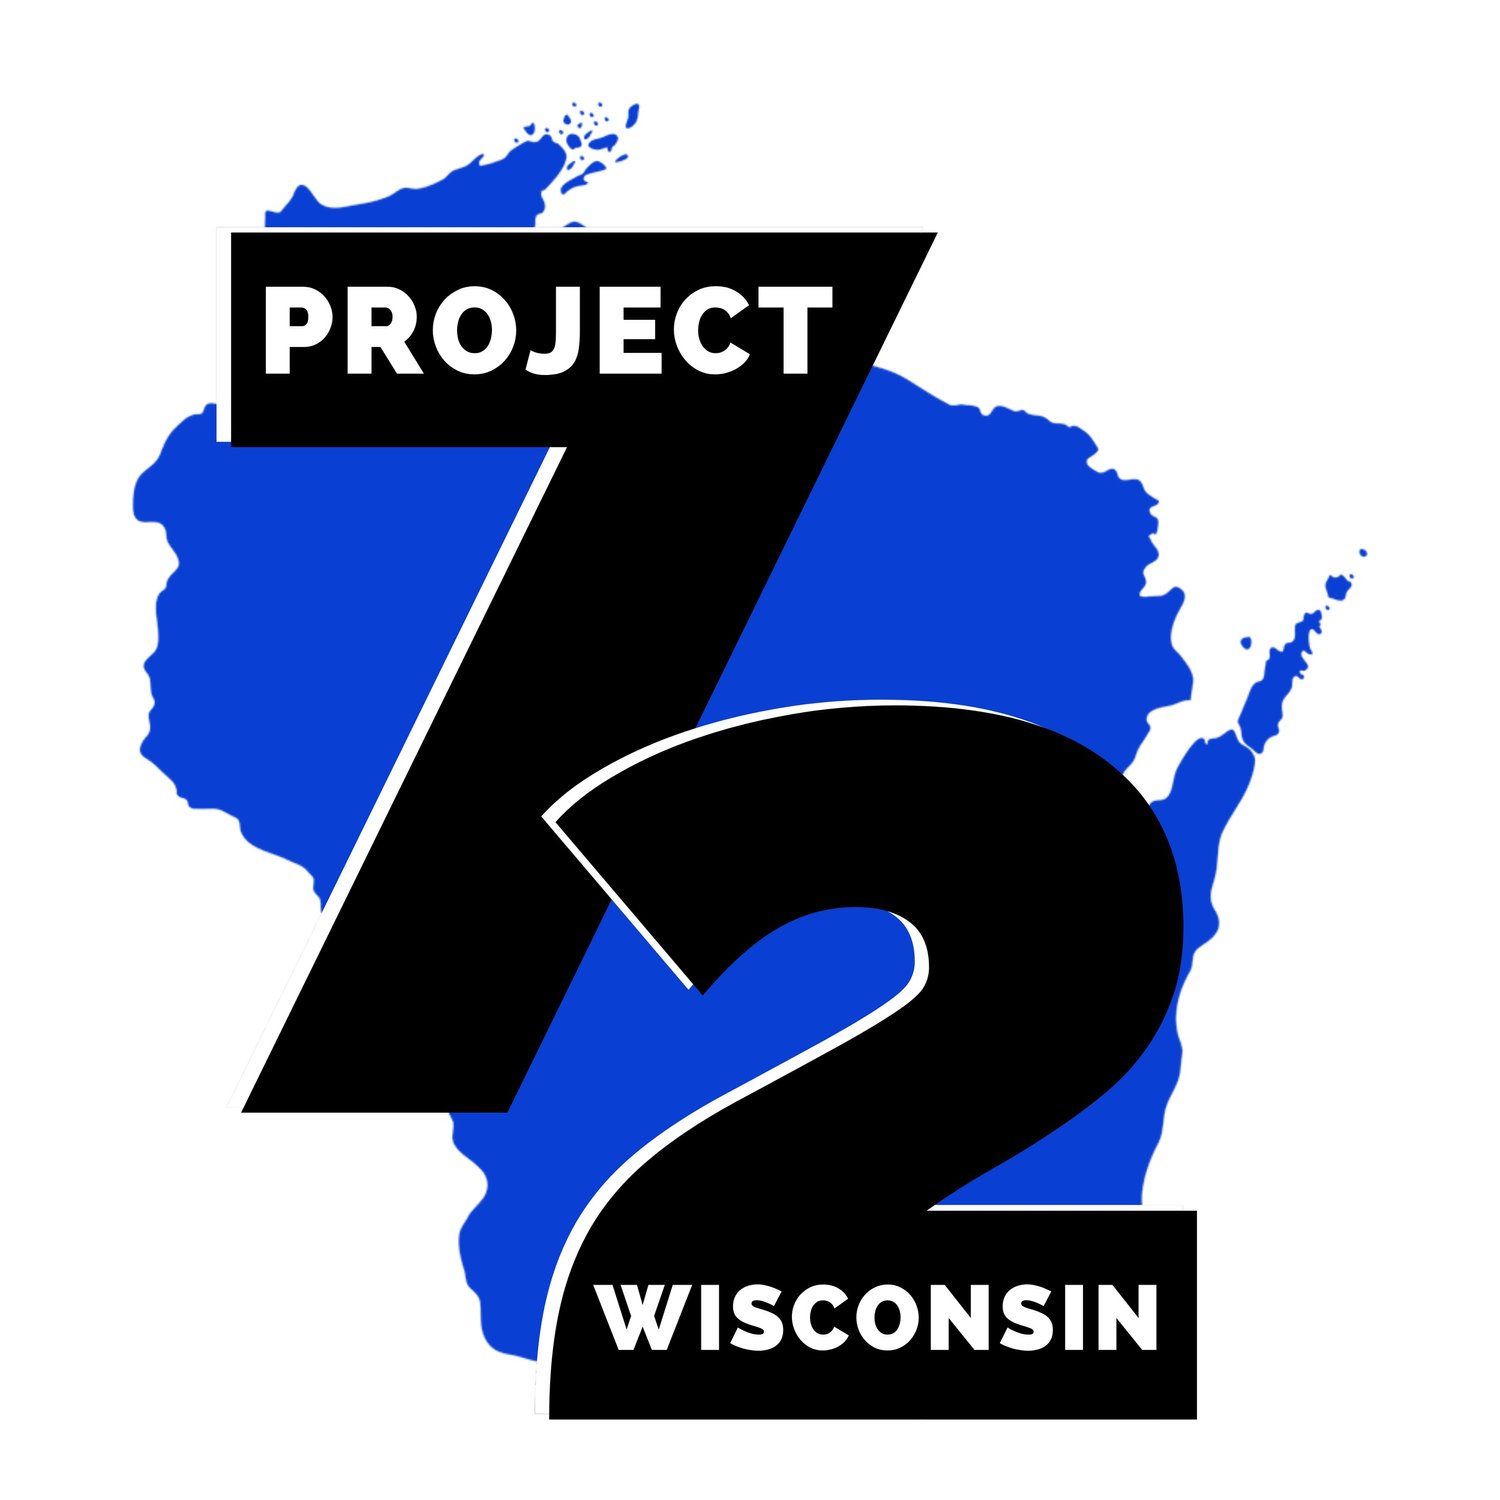 Project 72 Wisconsin